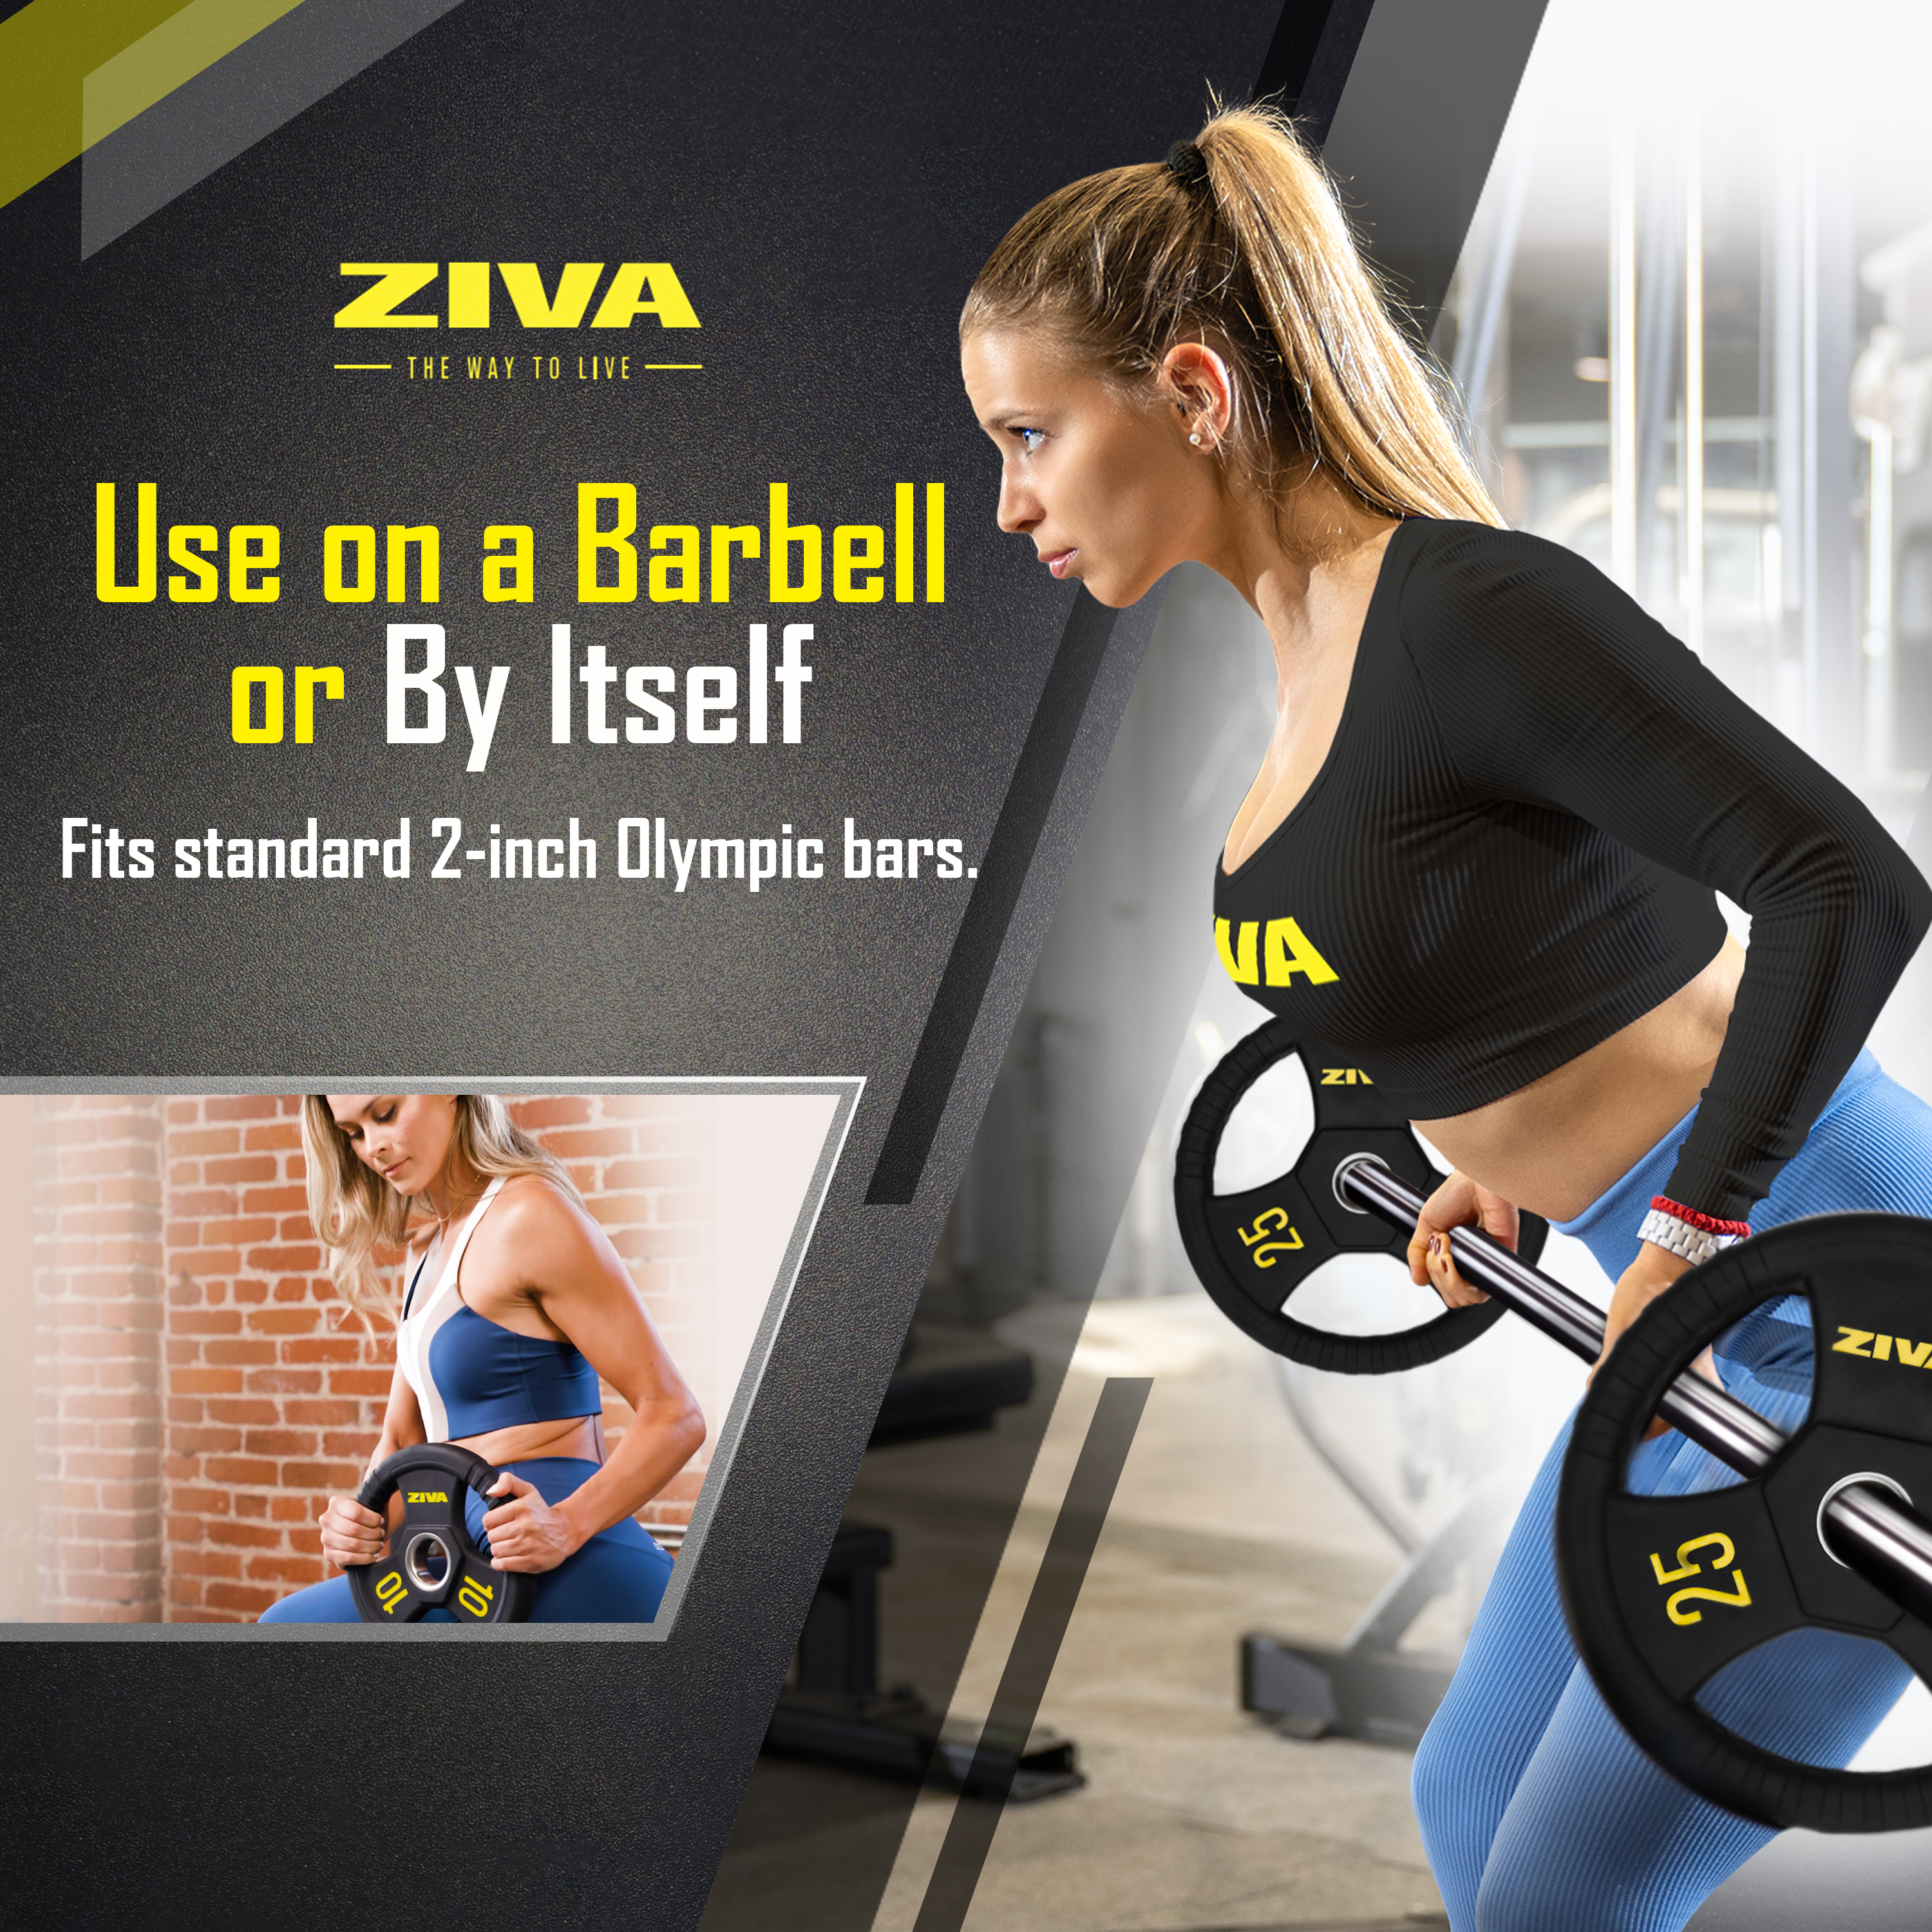 Use on a barbell or by itself. Fits standard 2-inch Olympic bars.